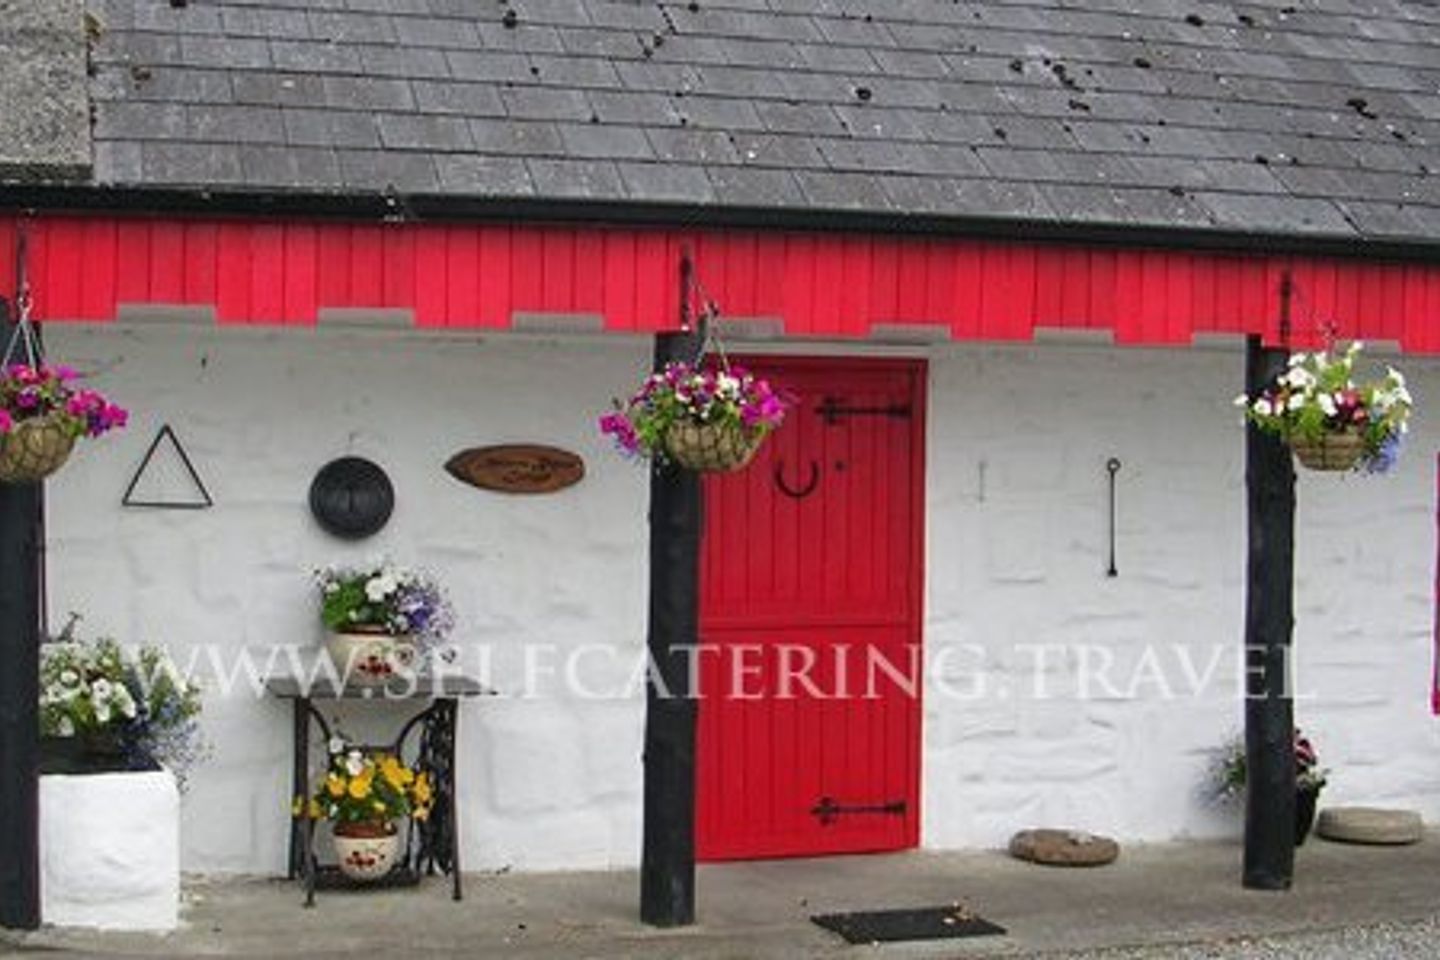 Portumna, Co. Galway